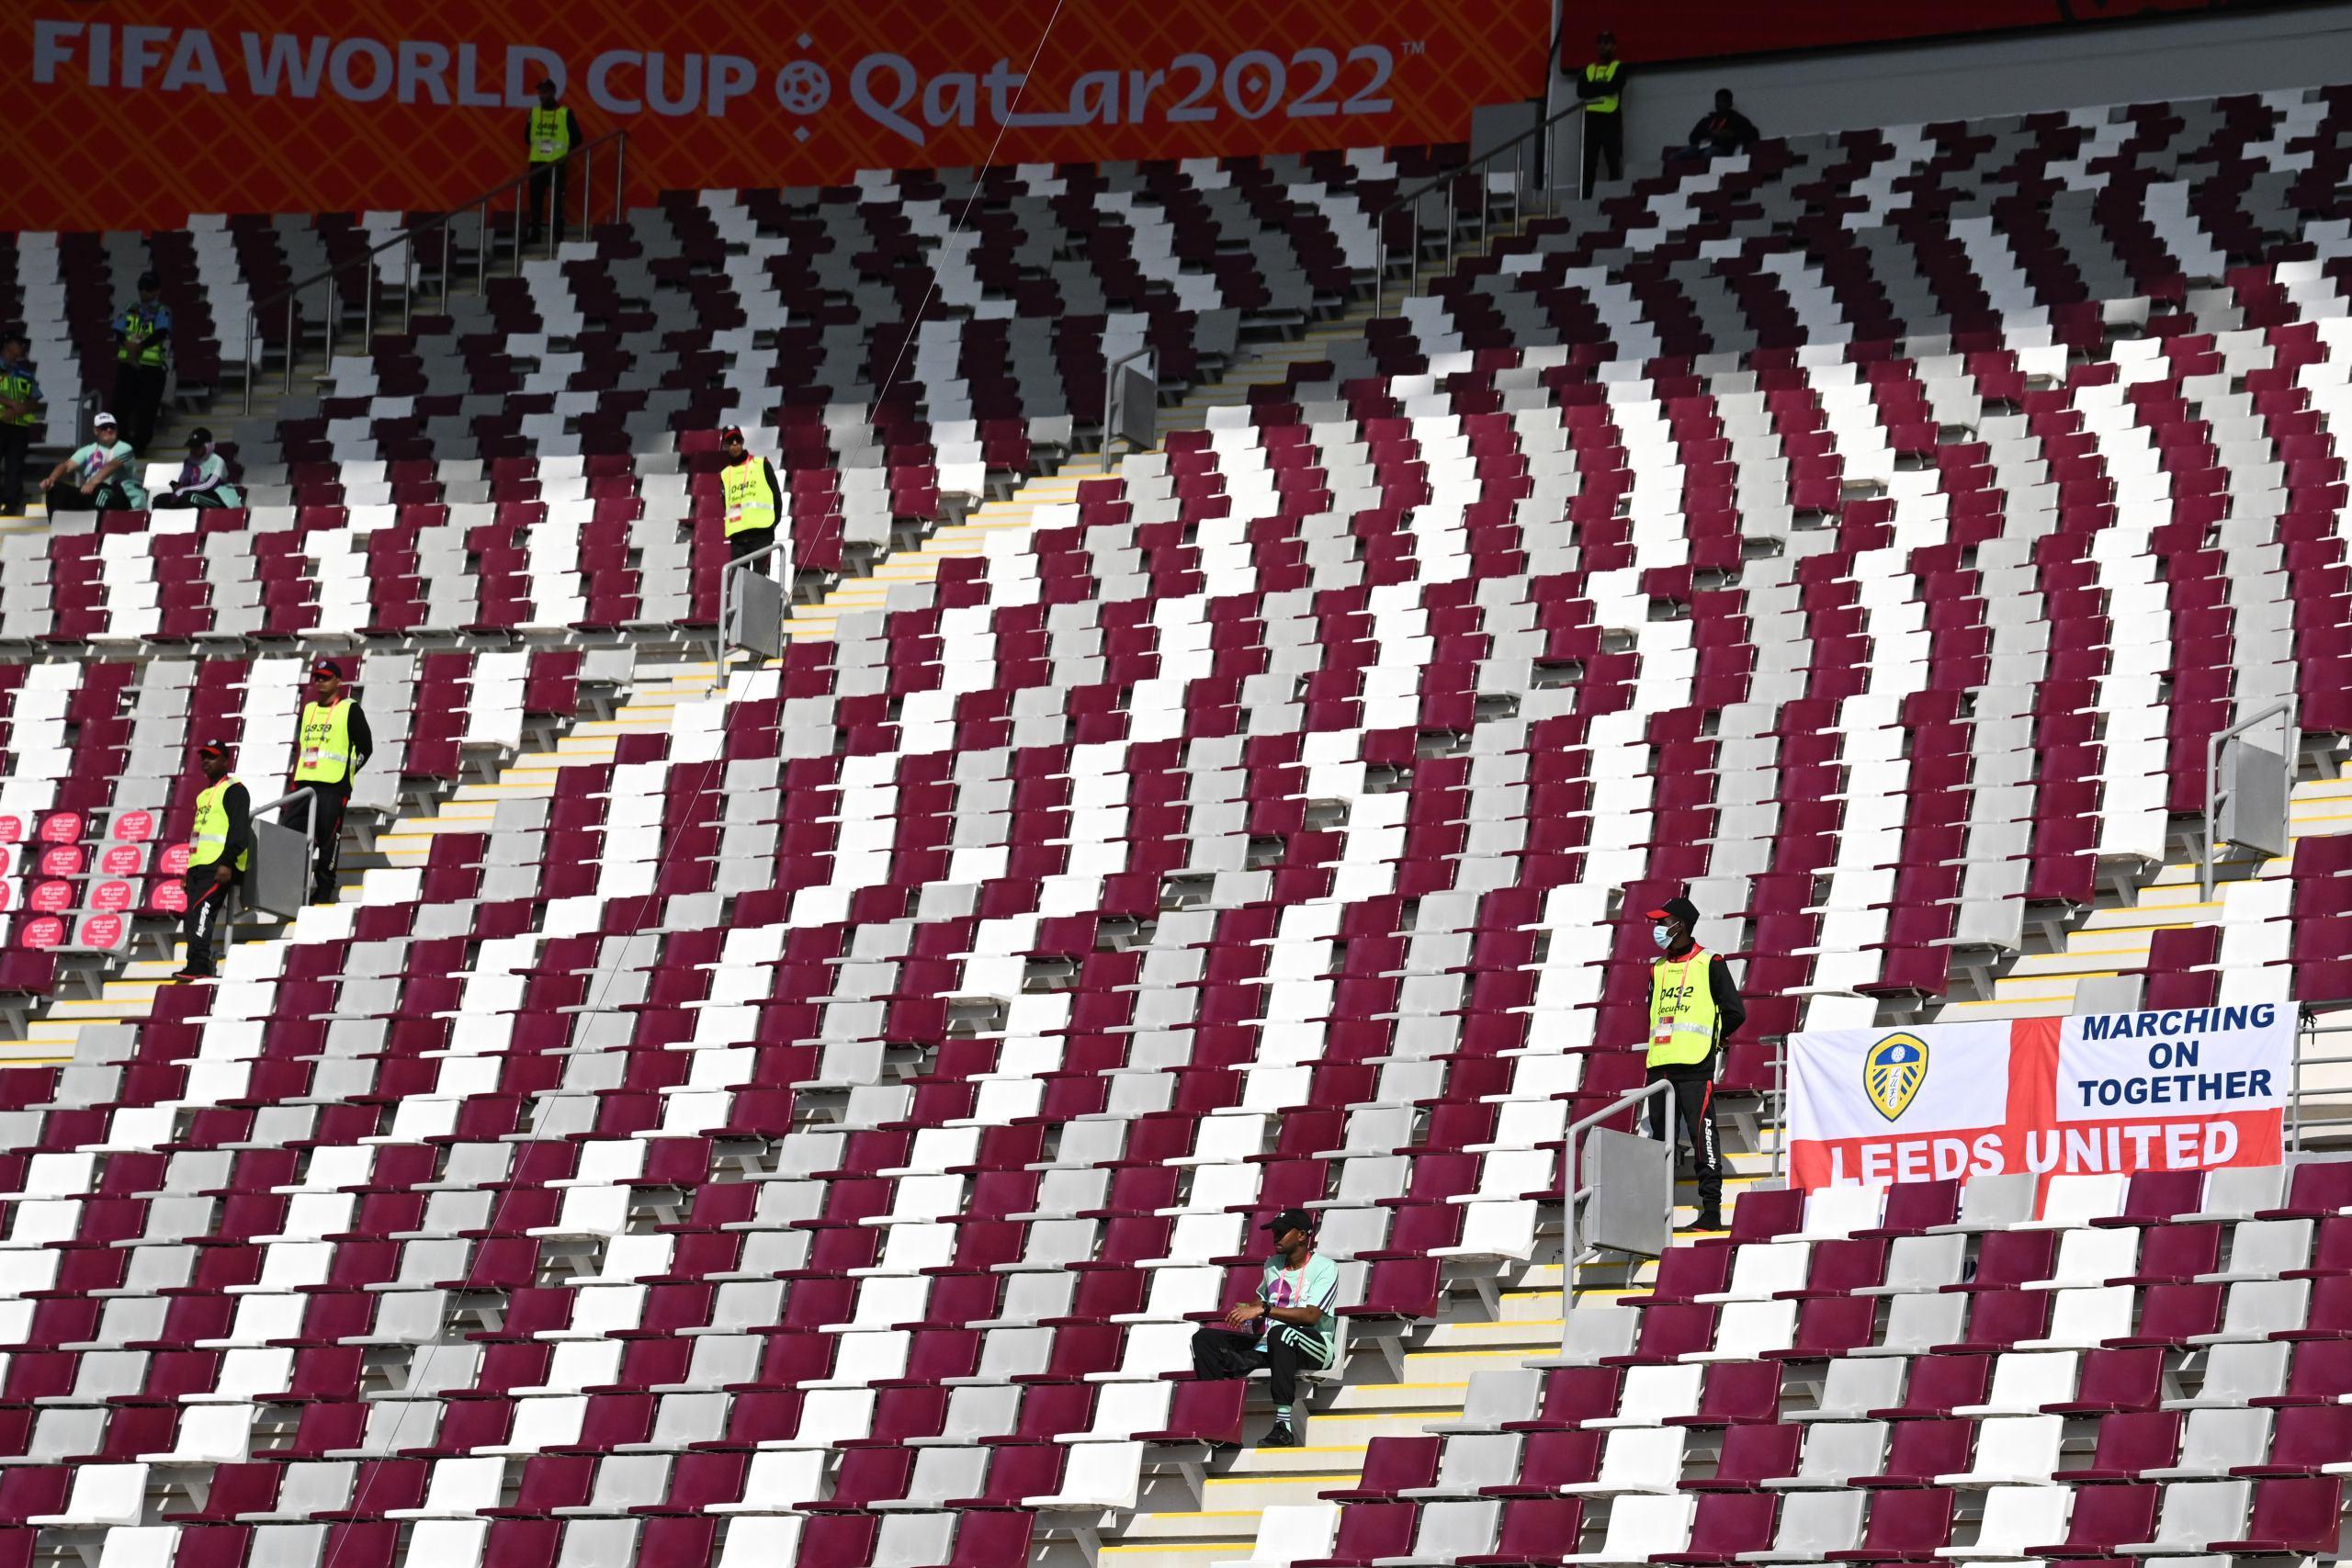 A member of security personnel stands guard next to a Leeds United banner amid empty seats before the start of the Qatar 2022 World Cup Group B football match between England and Iran at the Khalifa International Stadium in Doha on November 21, 2022. (Photo by Paul ELLIS / AFP)